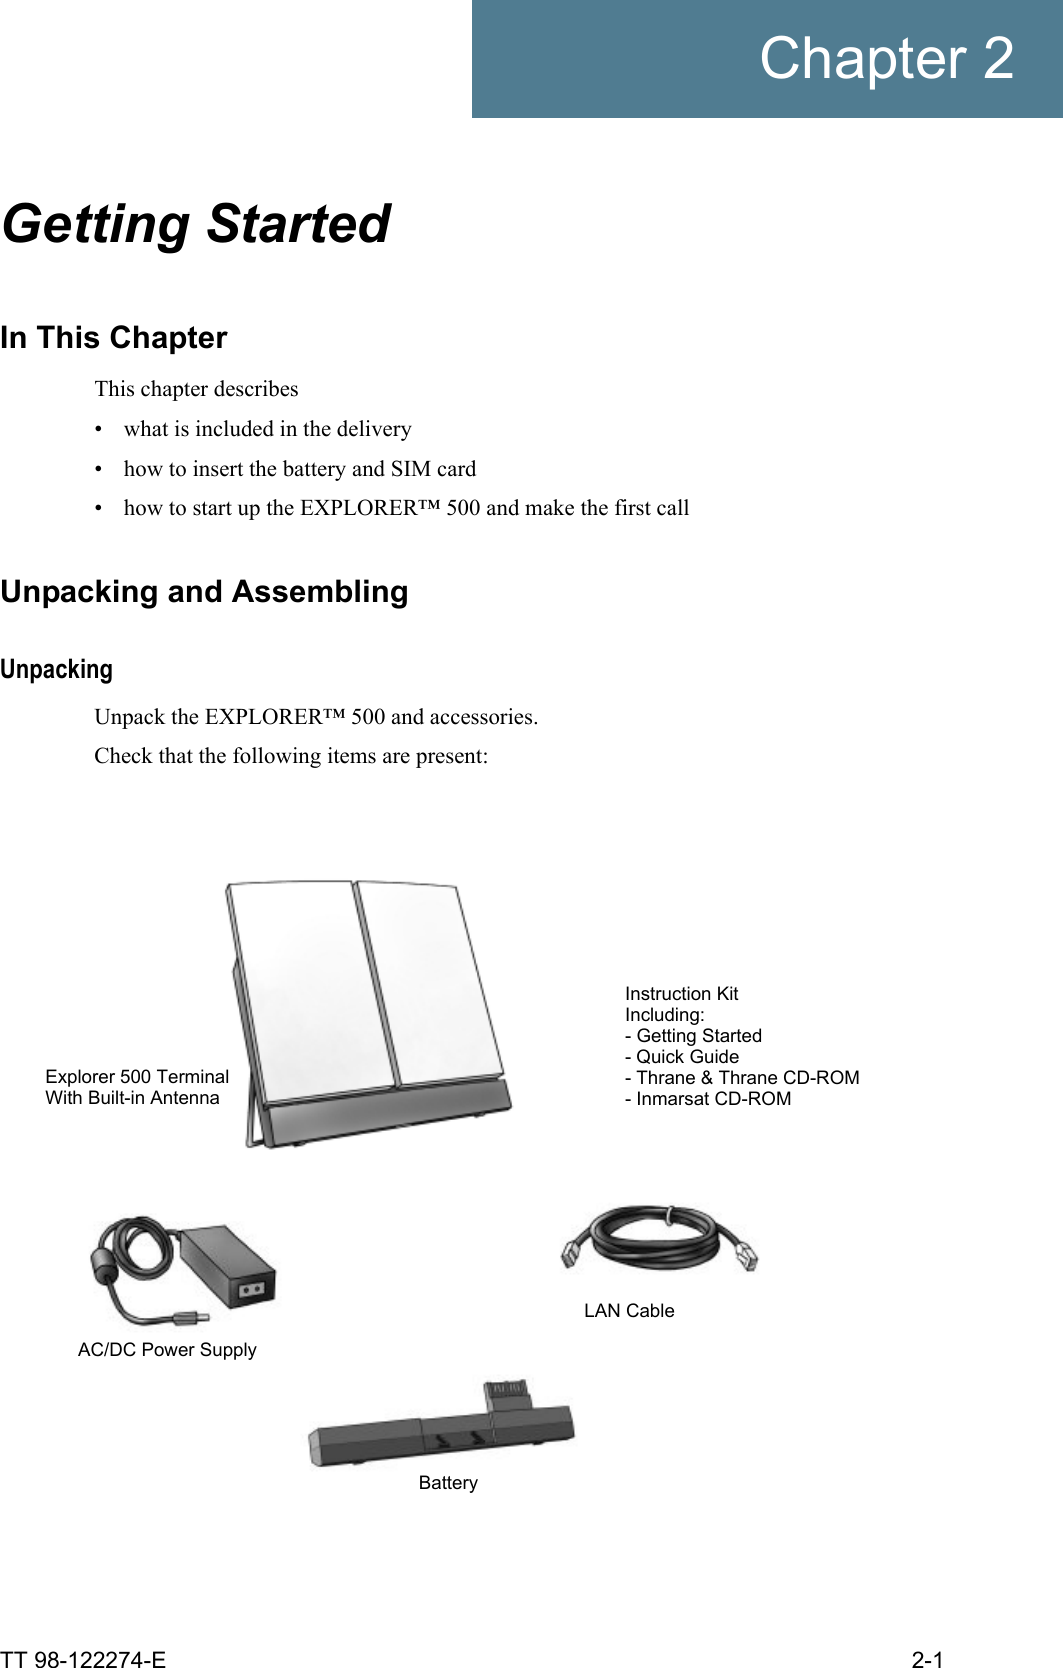 TT 98-122274-E 2-1Chapter 2Getting Started 2In This ChapterThis chapter describes• what is included in the delivery• how to insert the battery and SIM card• how to start up the EXPLORER™ 500 and make the first callUnpacking and AssemblingUnpackingUnpack the EXPLORER™ 500 and accessories.Check that the following items are present:Explorer 500 TerminalWith Built-in AntennaLAN CableAC/DC Power SupplyBatteryInstruction KitIncluding:- Getting Started- Quick Guide- Thrane &amp; Thrane CD-ROM- Inmarsat CD-ROM